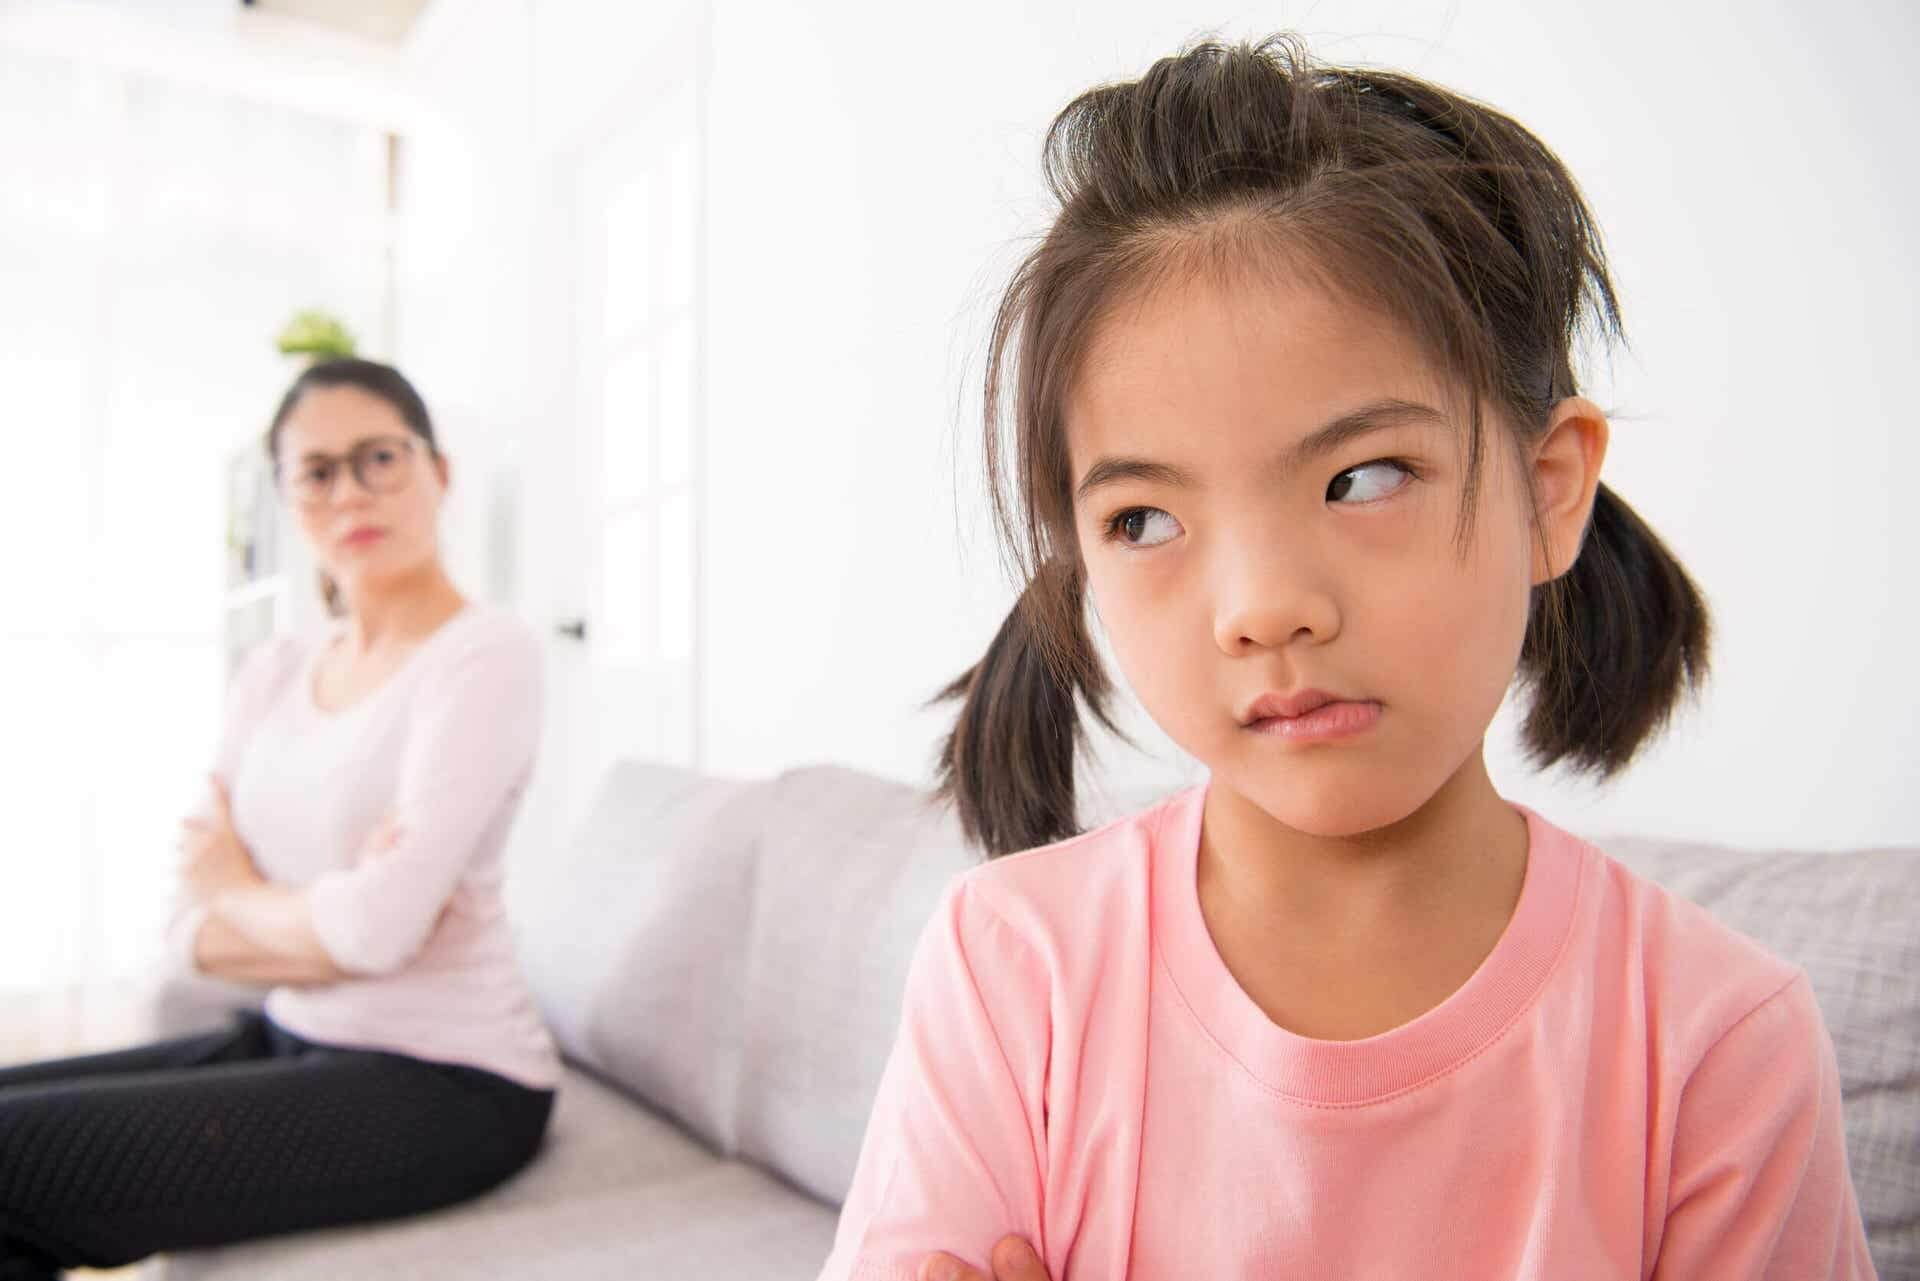 Girl very angry with her mother, she doesn't want to give her a hug.